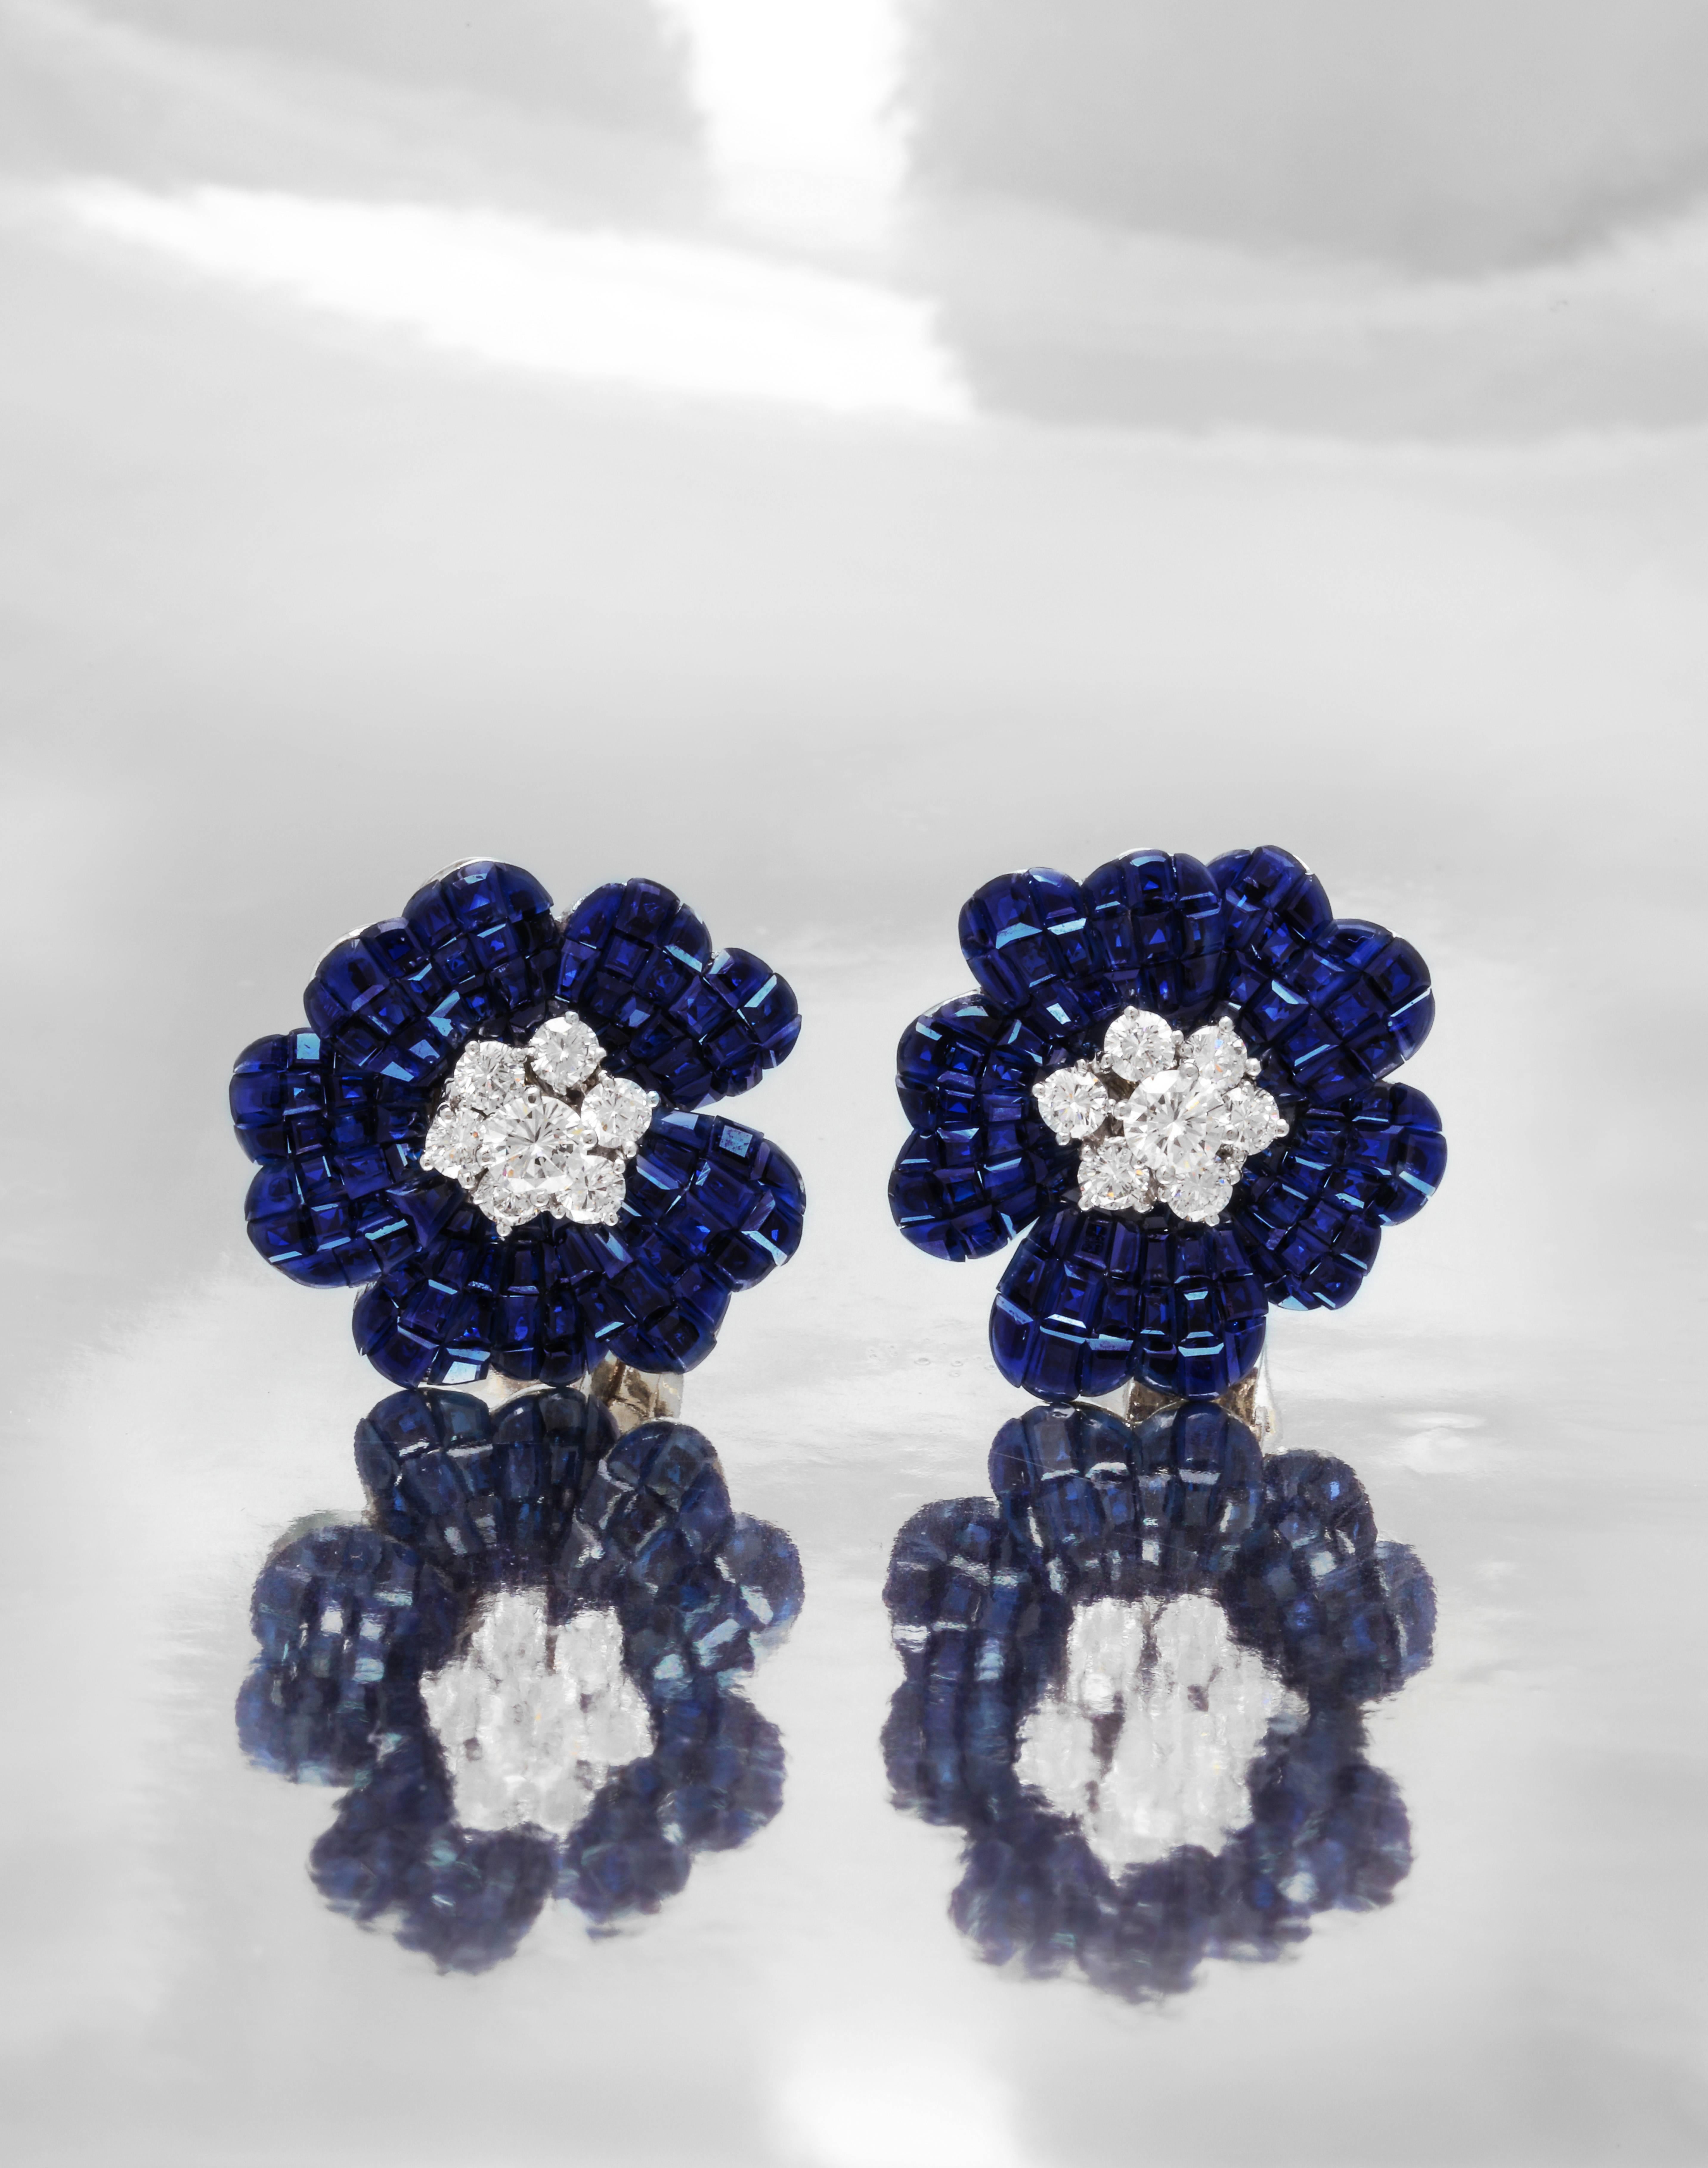 A Very Rare Van Cleef and Arpels Mystery Set Sapphire and Diamond Brooch and Earrings Set

The brooch is one of the larger models made. Measuring a very impressive: 2.1 inches wide and 2.75 tall

The earrings measure: 1 inch wide

A iconic example